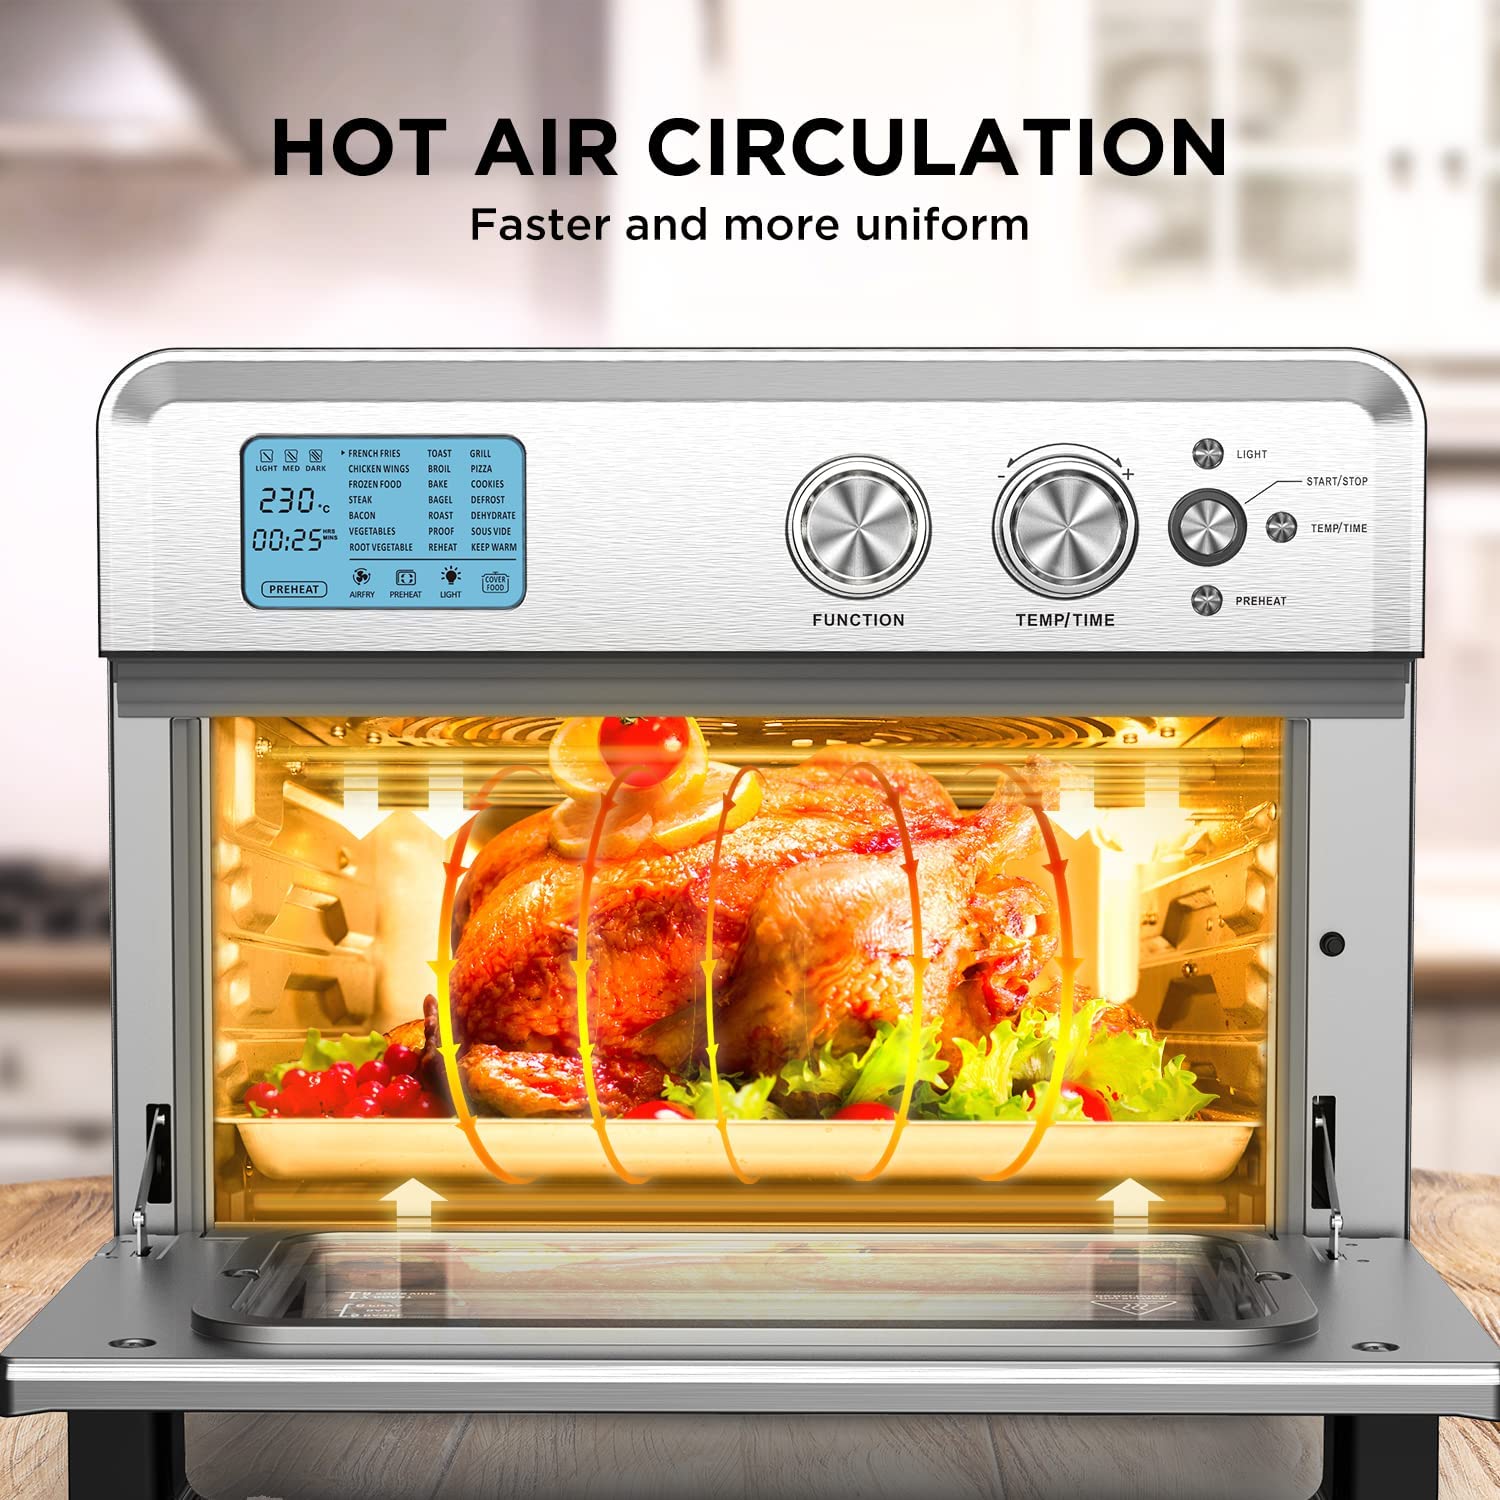 CalmDo AF25L Toaster Oven, CalmDo 26.3QT Large Air Fryer Convection Oven, Fry Oil-Free, 21 Preset Cooking Functions, Stainless Steel - image 4 of 10